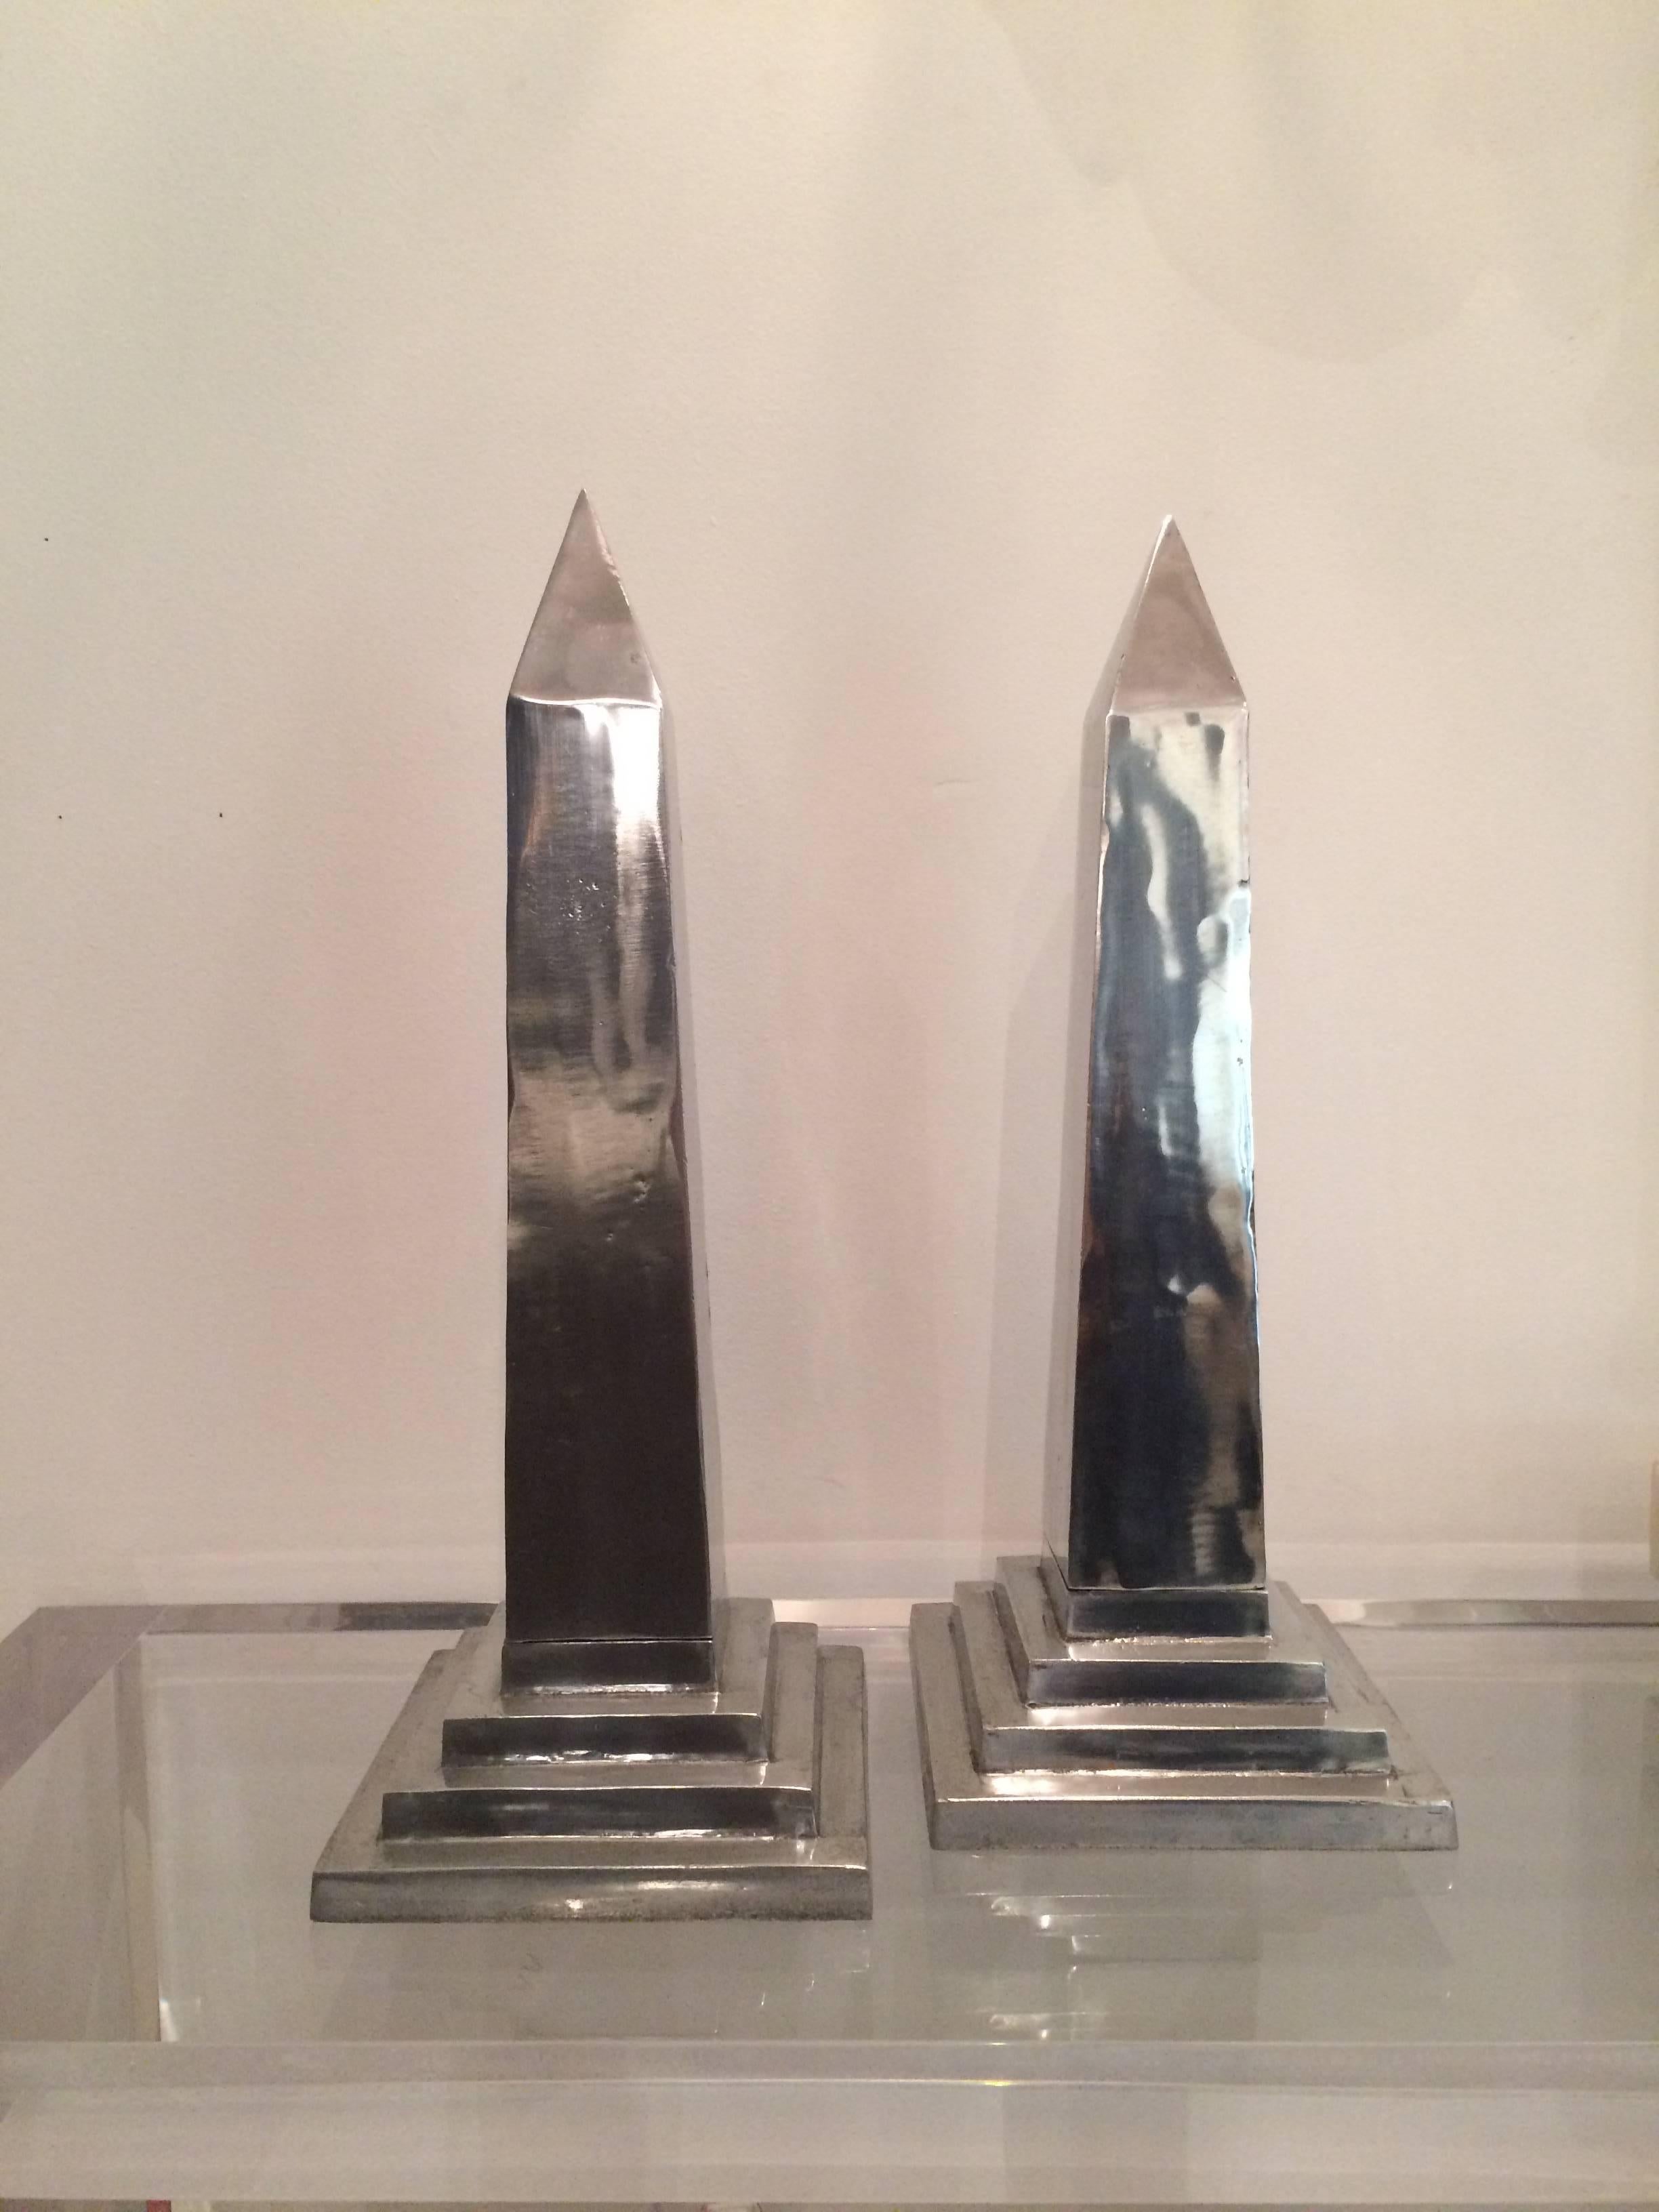 Pair of large polished aluminum obelisks by Arthur Court, with stamped signature on underside. Stepped base is made as separate piece, and is screwed into place. Some pitting and wear, but generally smooth and polished overall. Great scale!